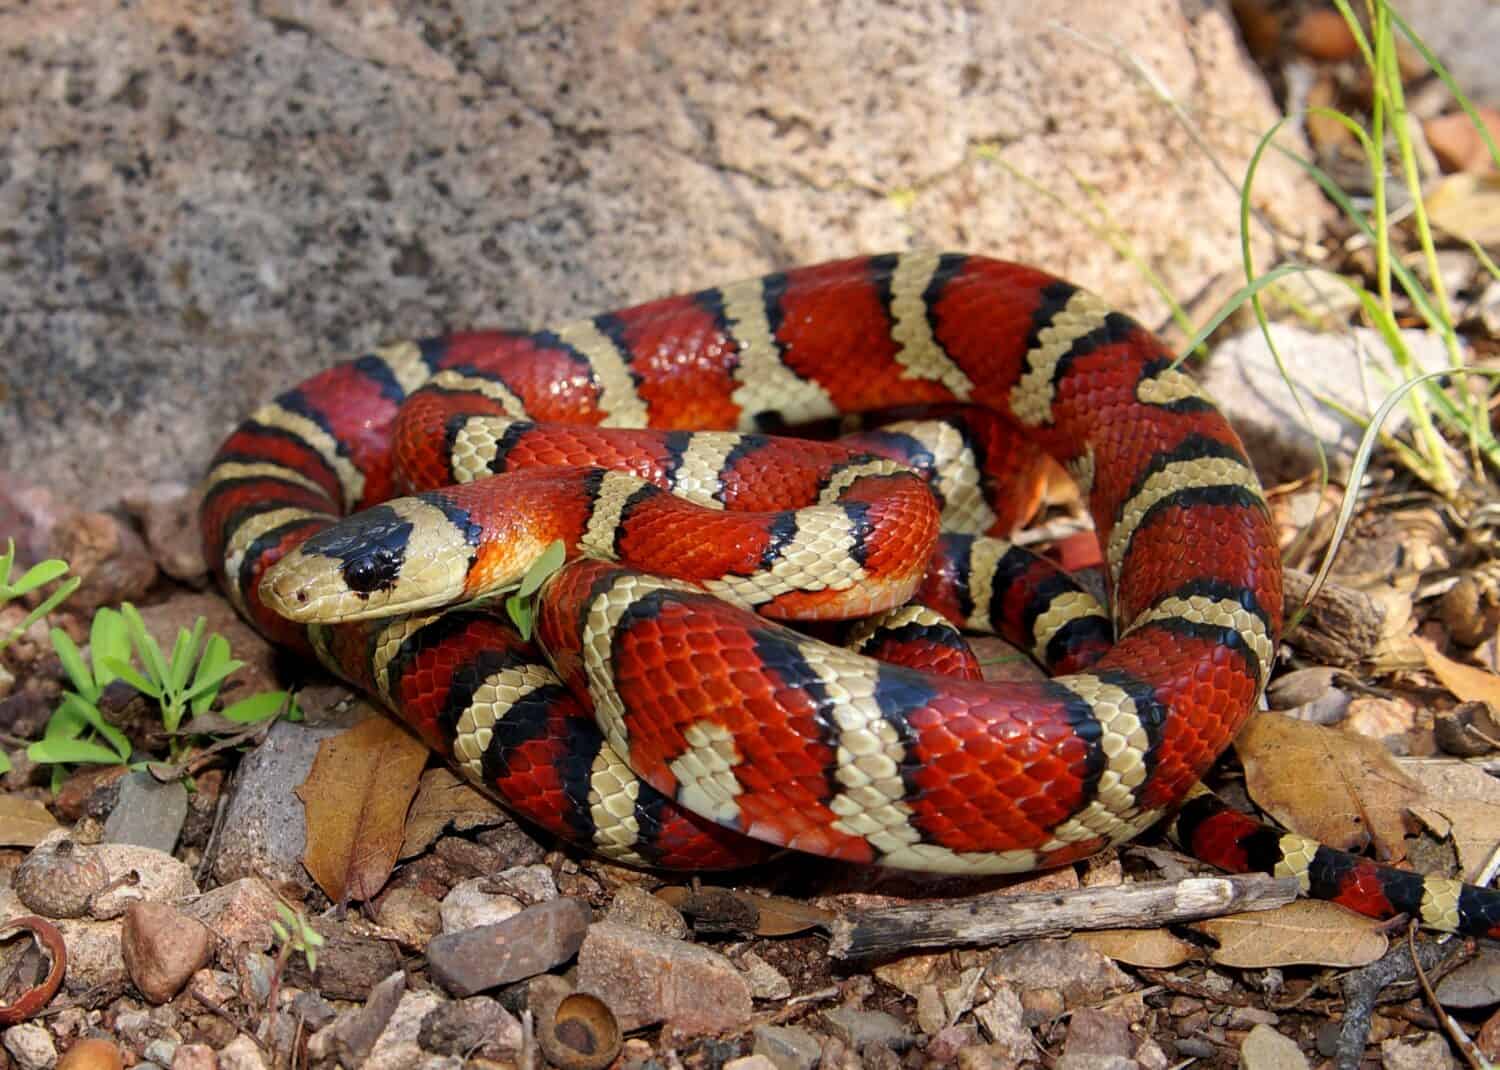 An Arizona coral snake, identifiable by its signature red, yellow, and black stripes.